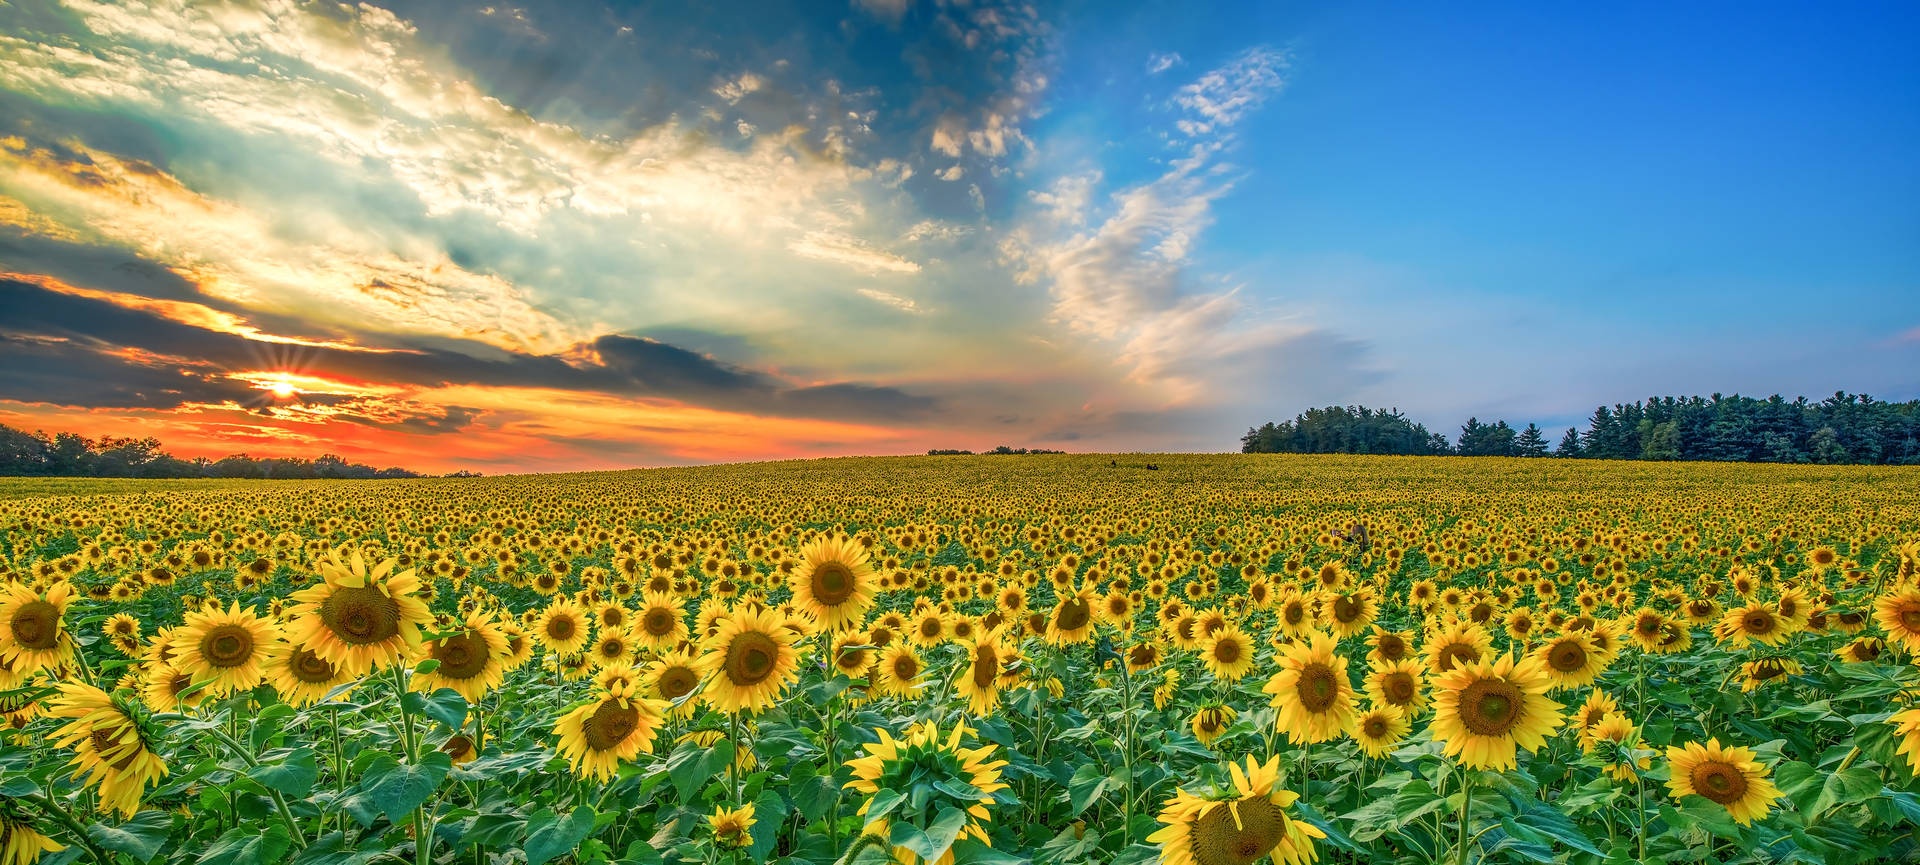 3360X1513 Sunflower Wallpaper and Background